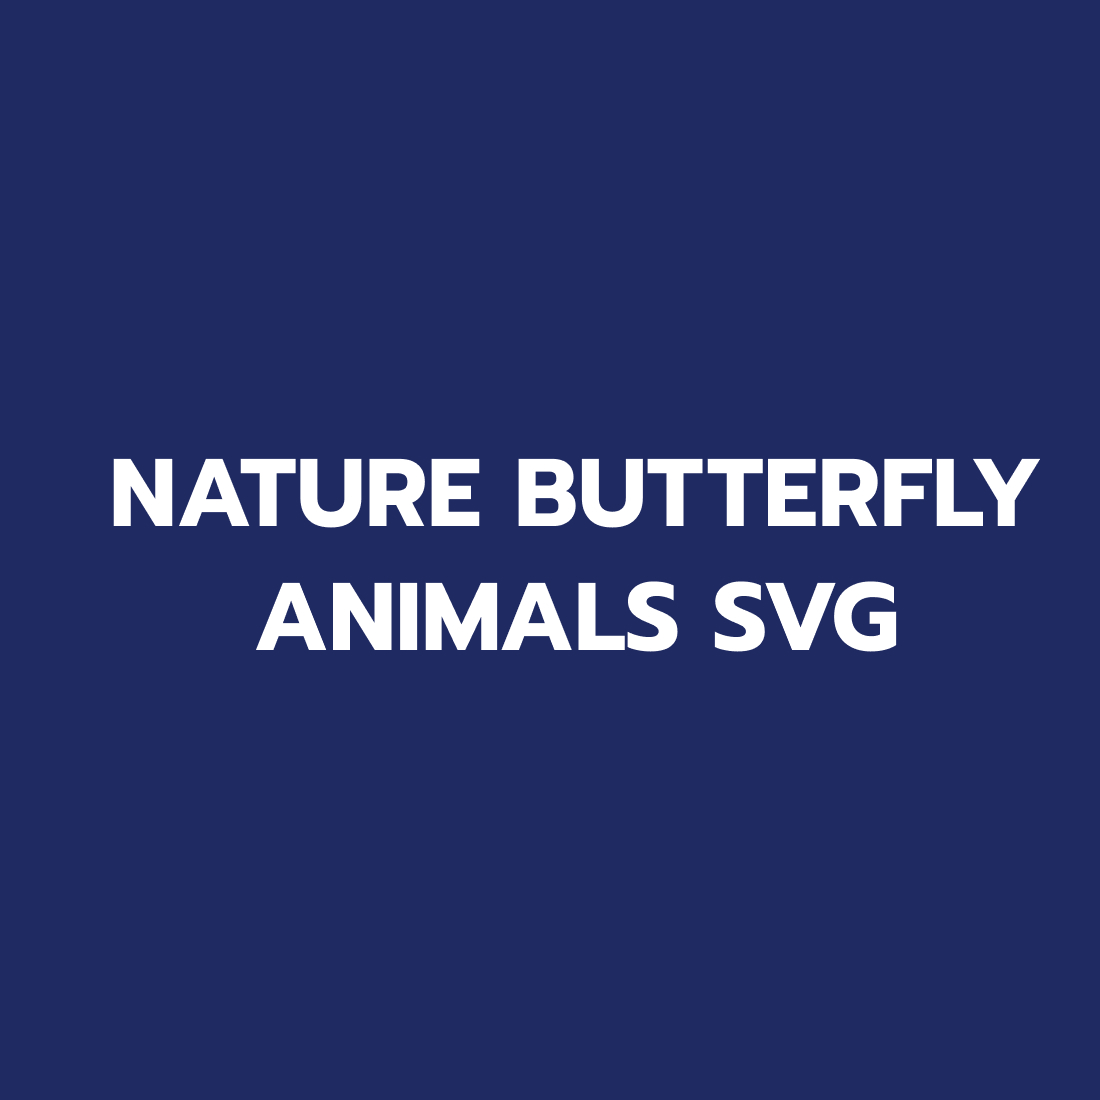 Nature Butterfly Animals SVG preview.